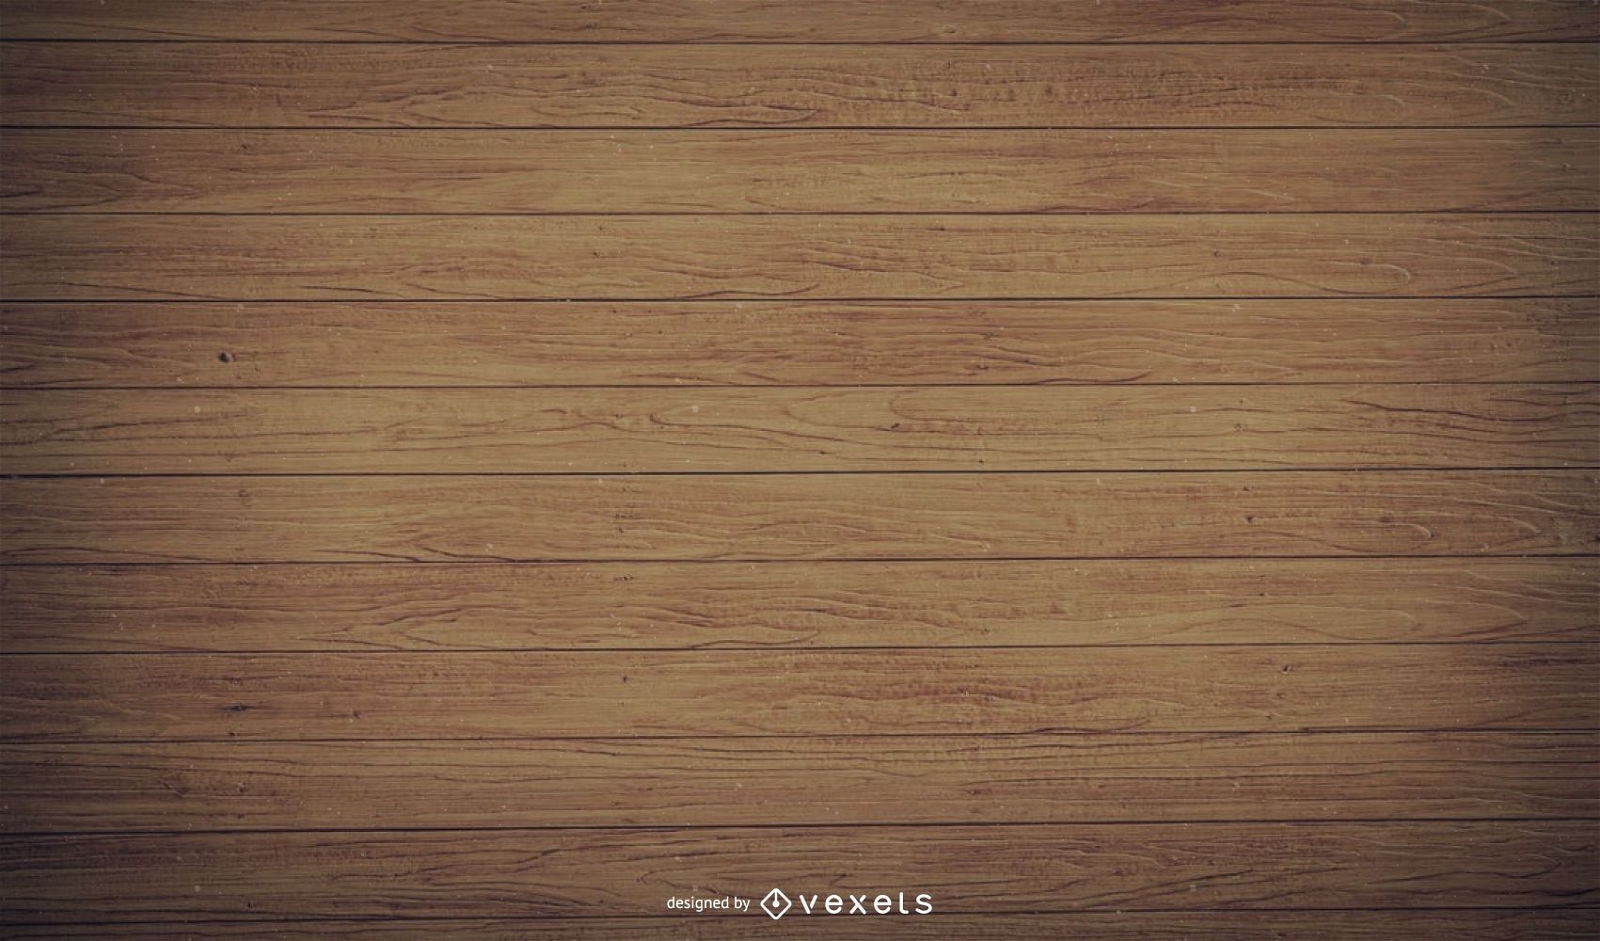 Old Realistic Wooden Planks with Shades